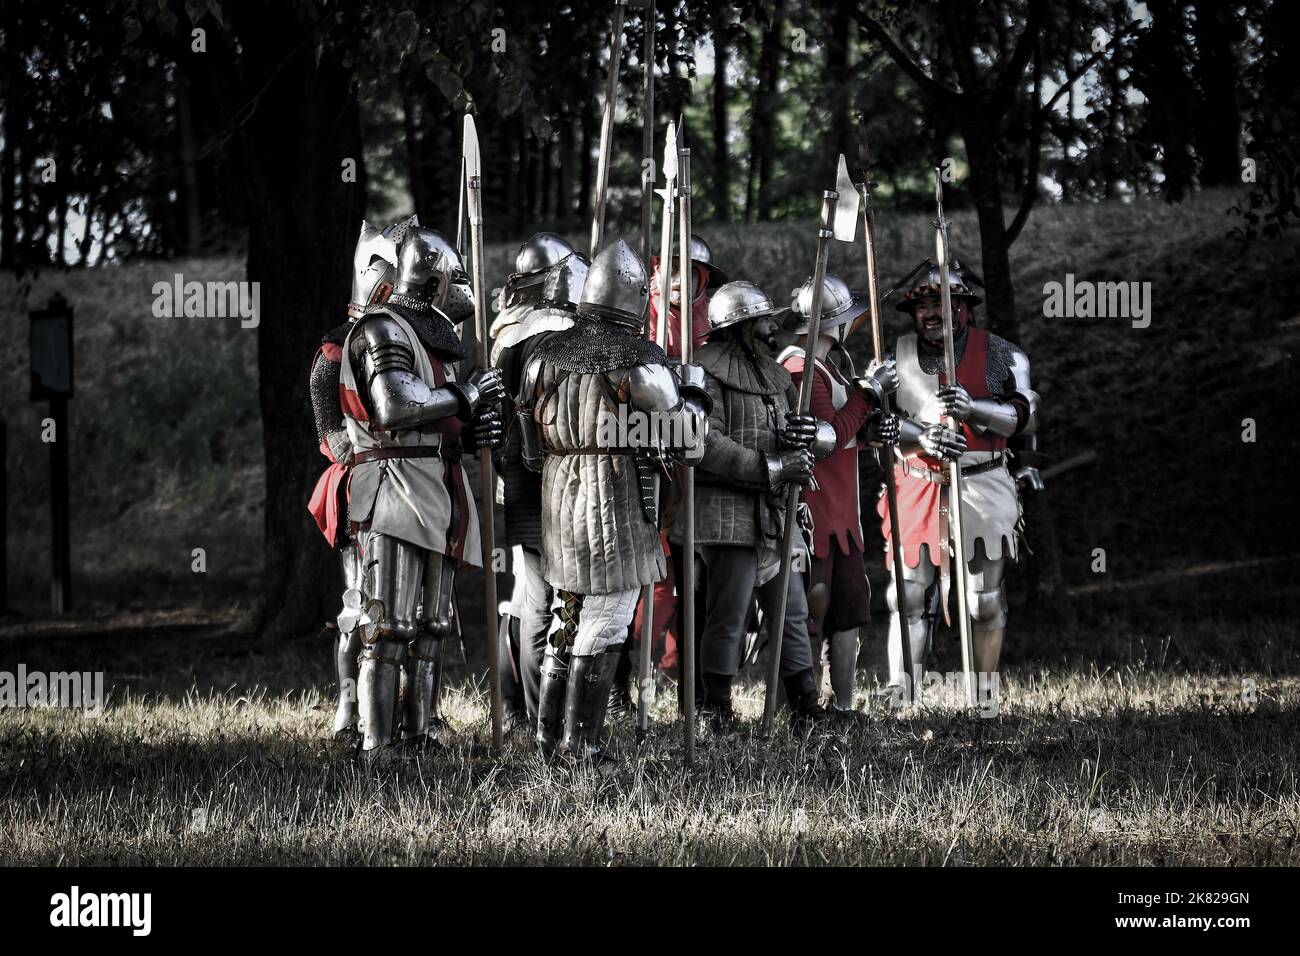 historical re-enactment of medieval battle in period costumes, evocative images of medieval combat Stock Photo